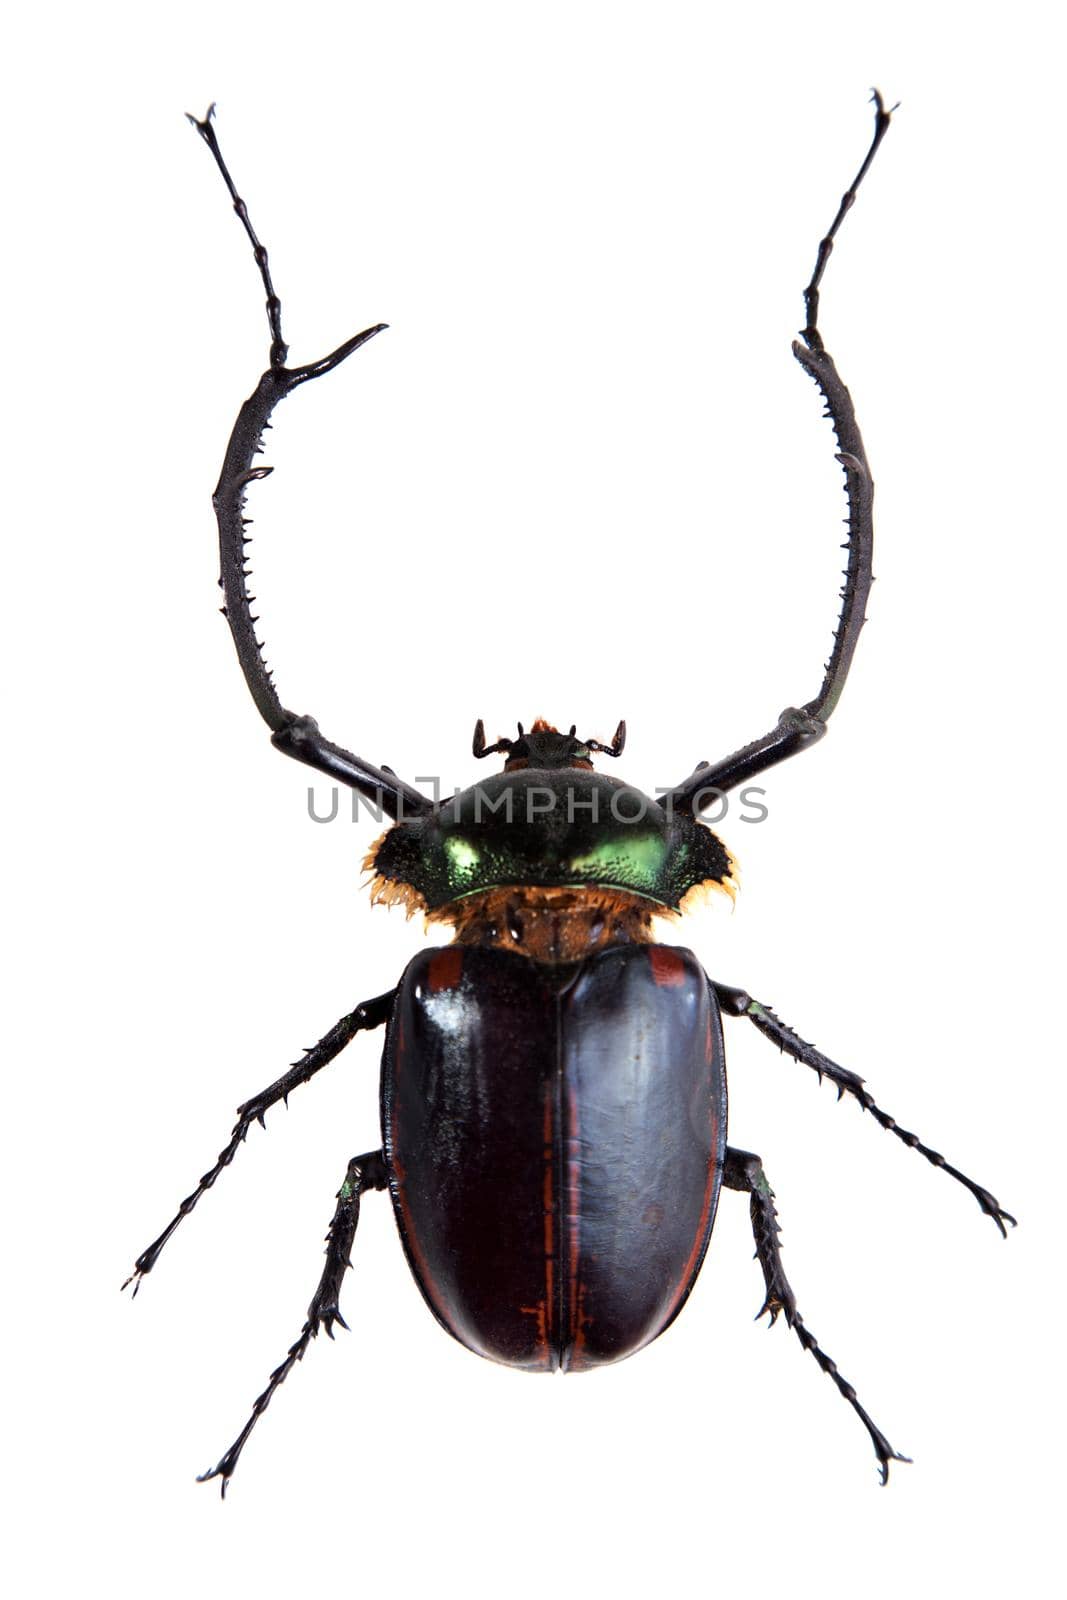 Arlequin beetle in museum isolated on the white background